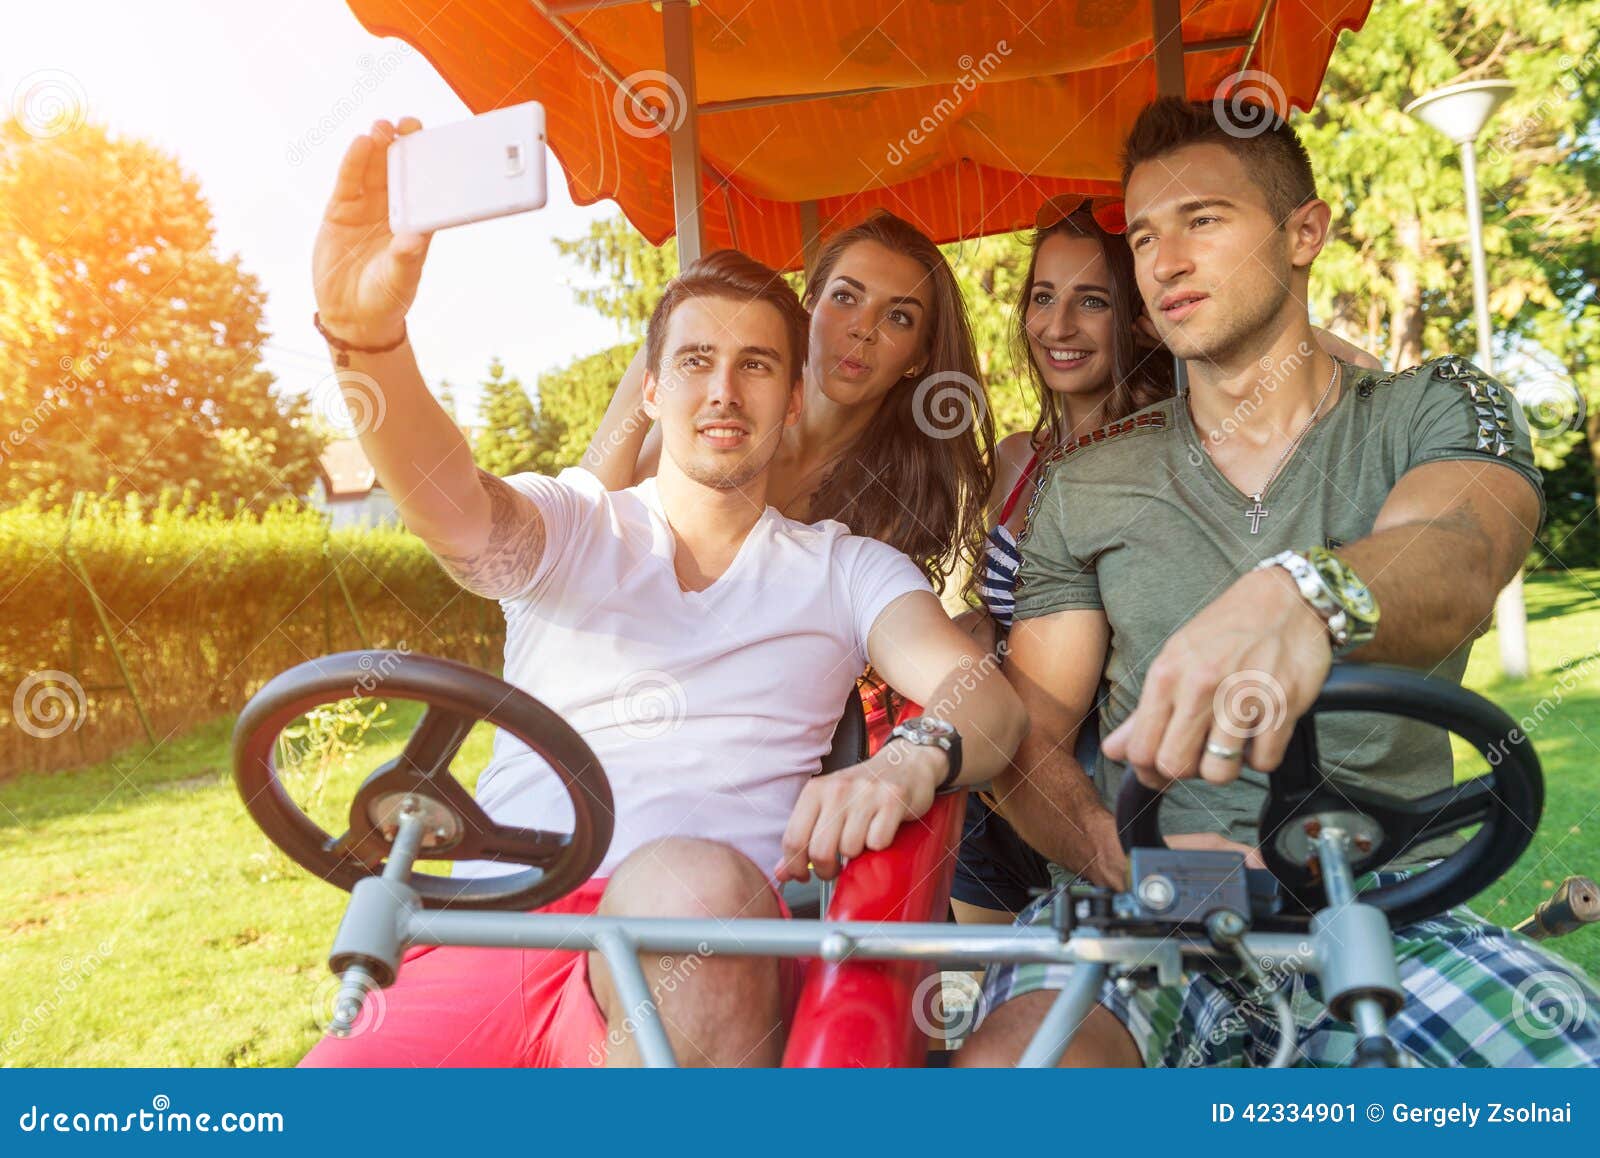 four young people in a four-wheeled bicycle, they do selfie